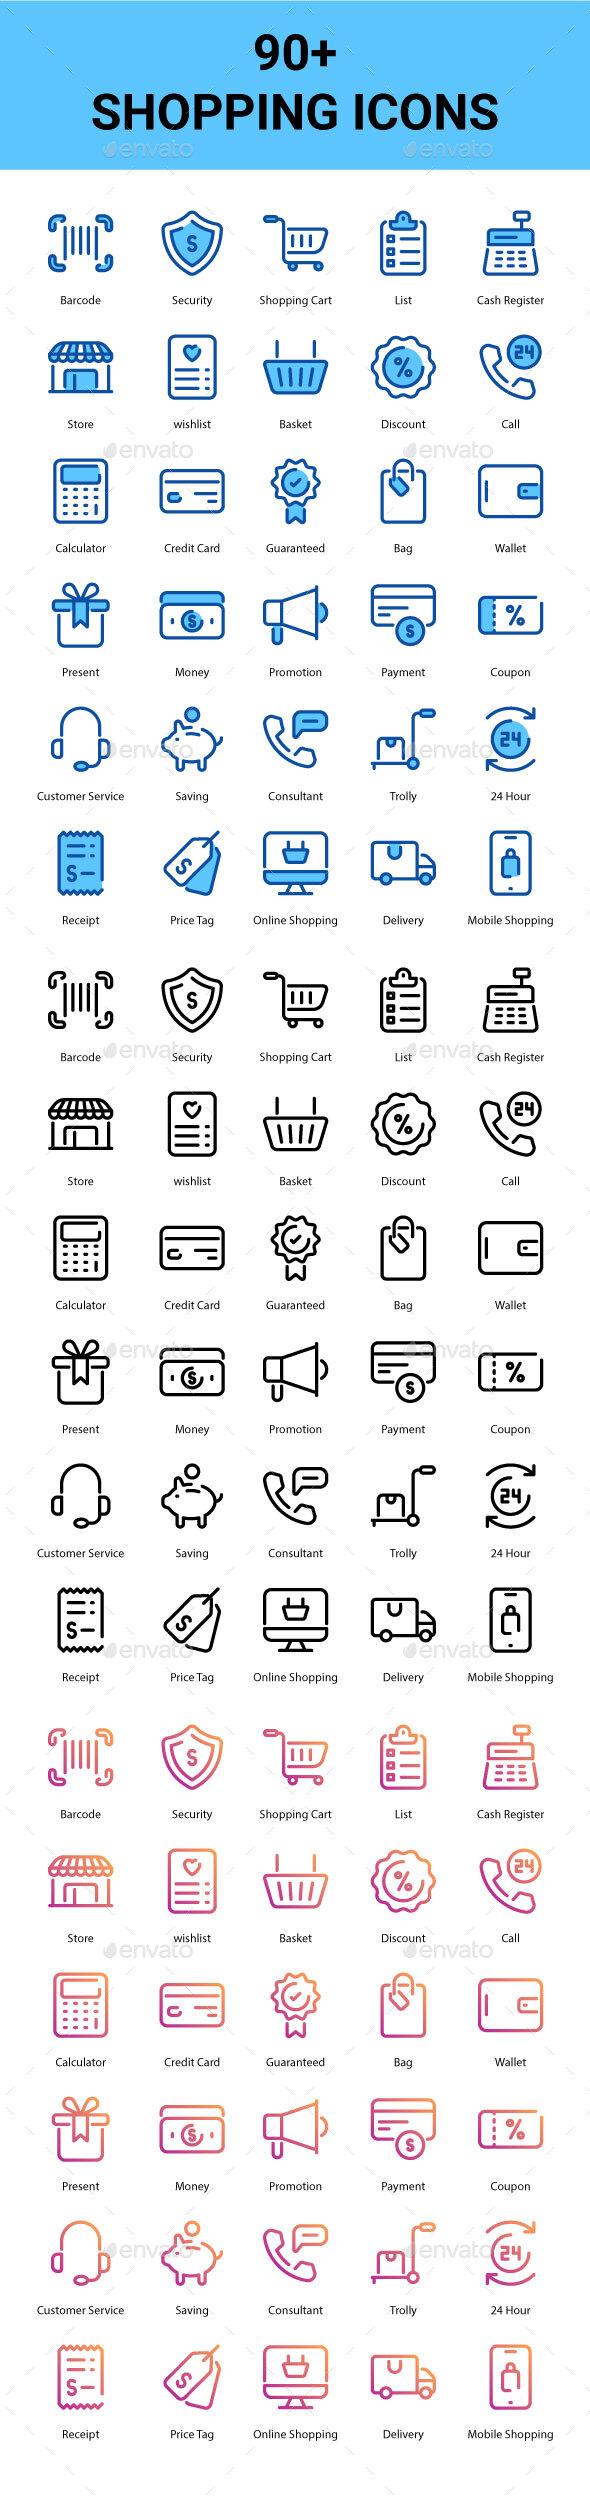 [DOWNLOAD]Shopping Unique Icons